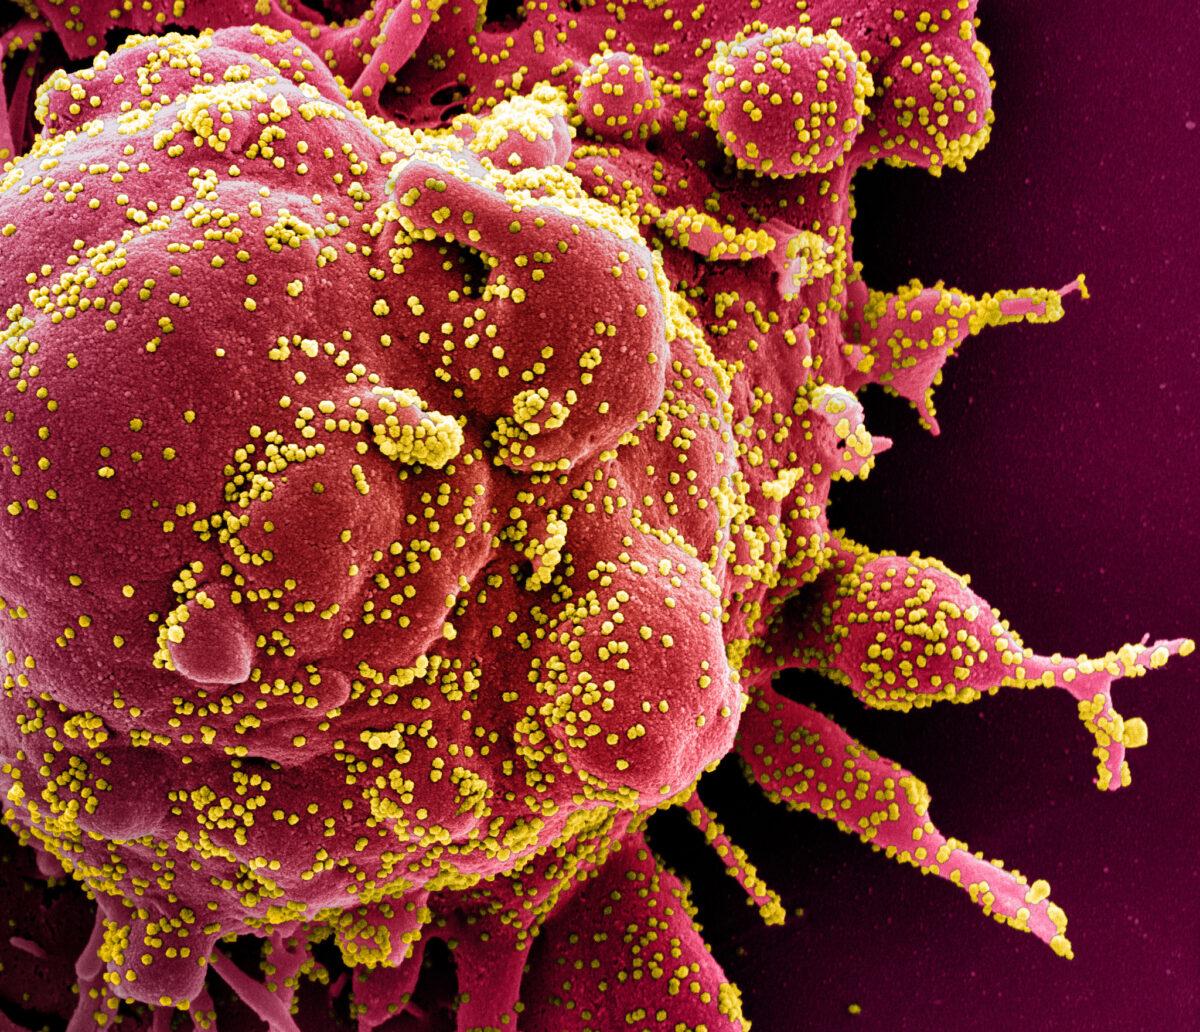 Colorized scanning electron micrograph of an apoptotic cell (red) heavily infected with CCP virus particles (yellow), isolated from a patient sample. Image captured at the NIAID Integrated Research Facility (IRF) in Fort Detrick, Maryland, published on April 2, 2020. (NIAID)